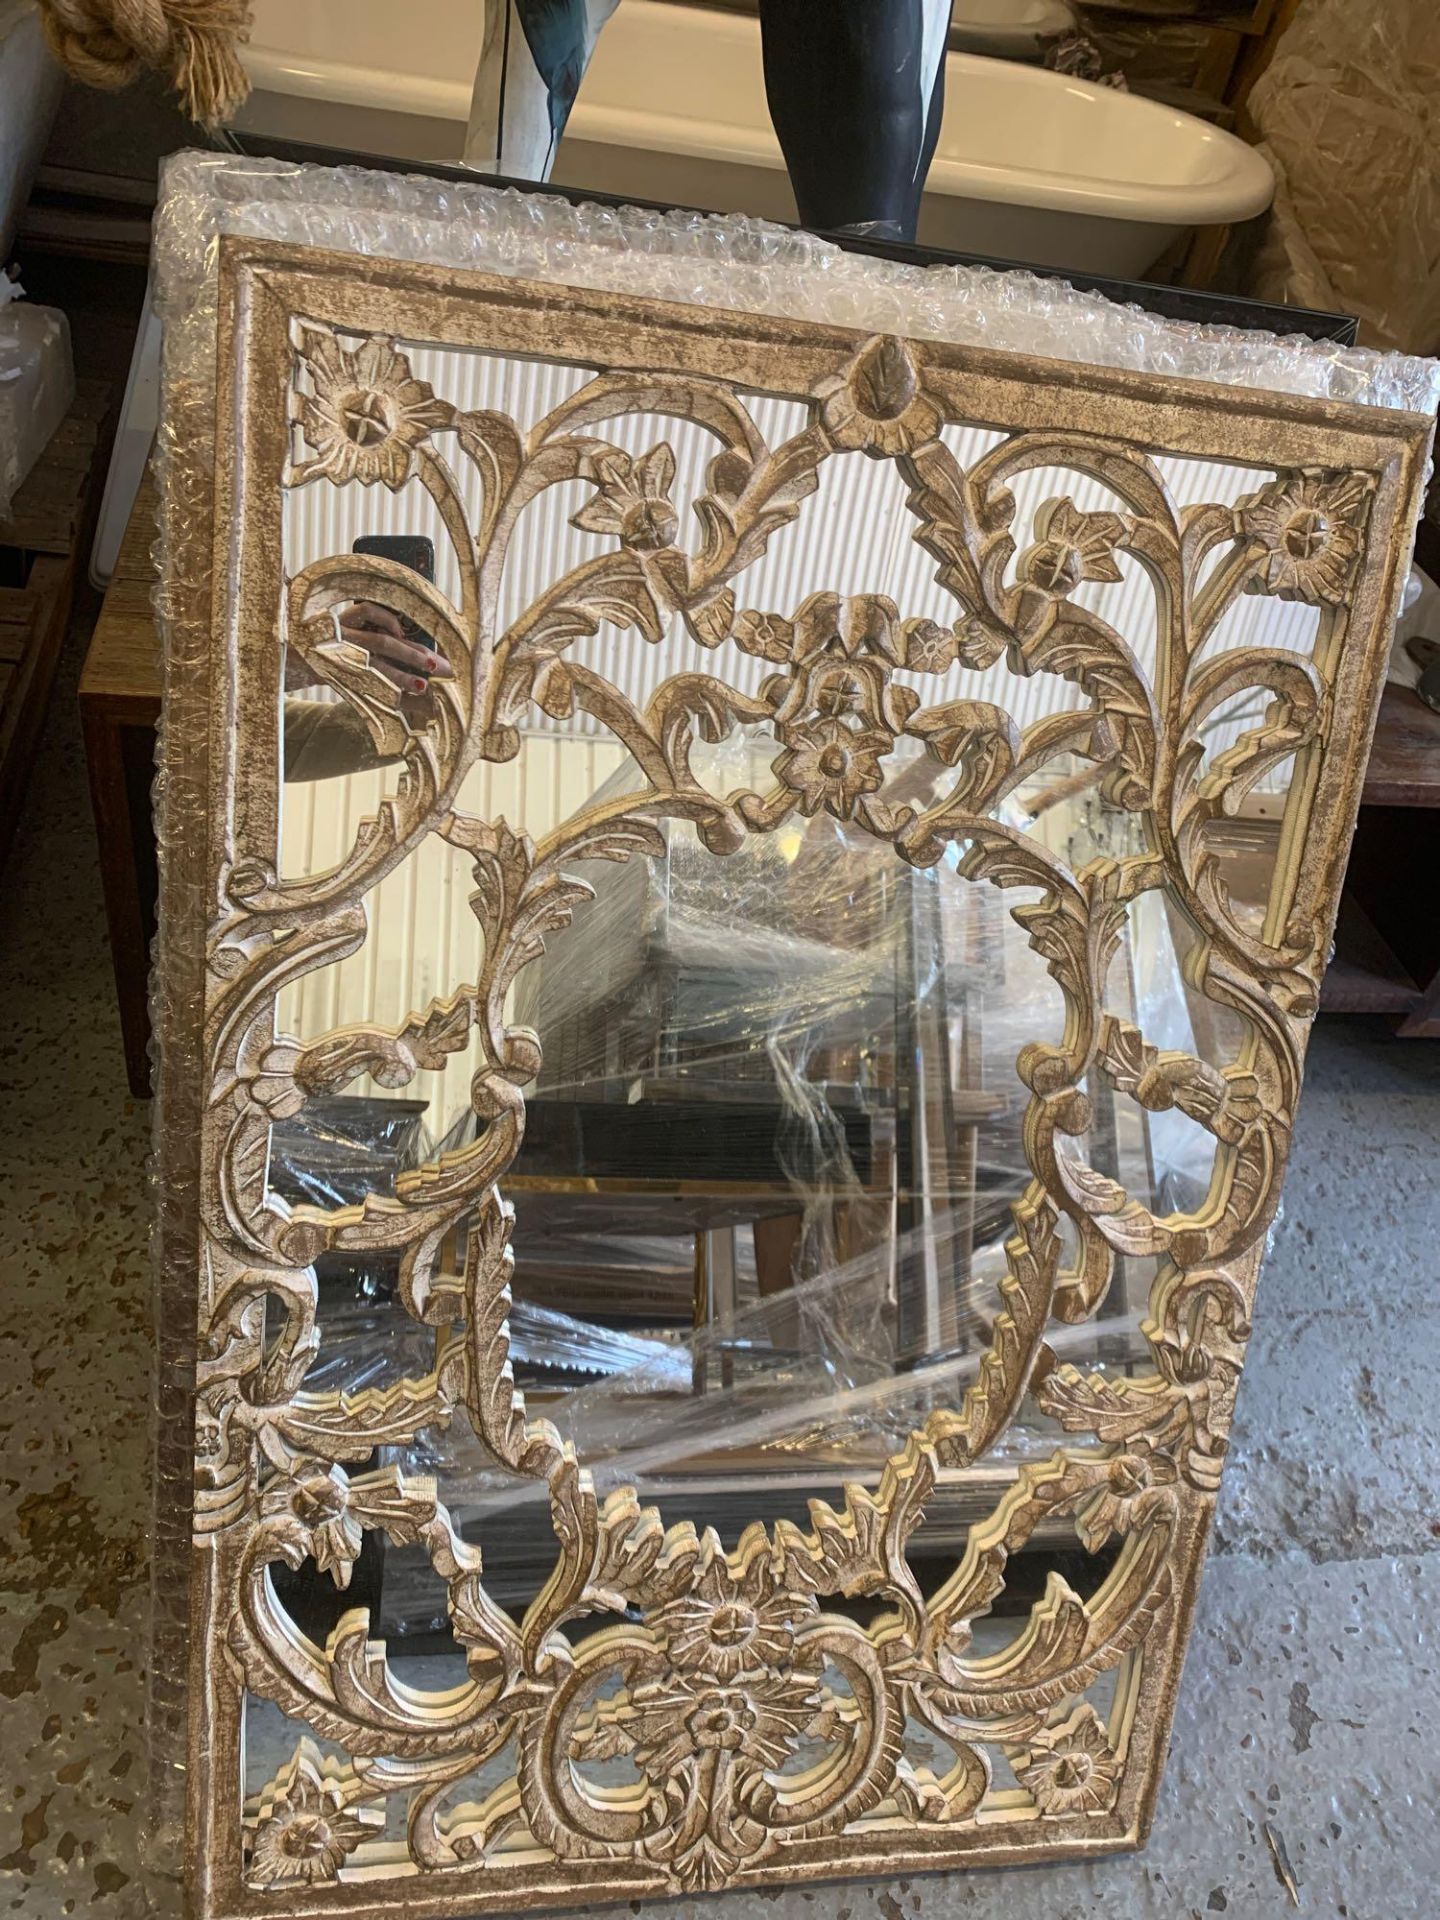 Limi Mirror 610 x 920mm White Washed An Ornate Artisan-Style Wall Mirror With An Intricate Design, - Image 2 of 4